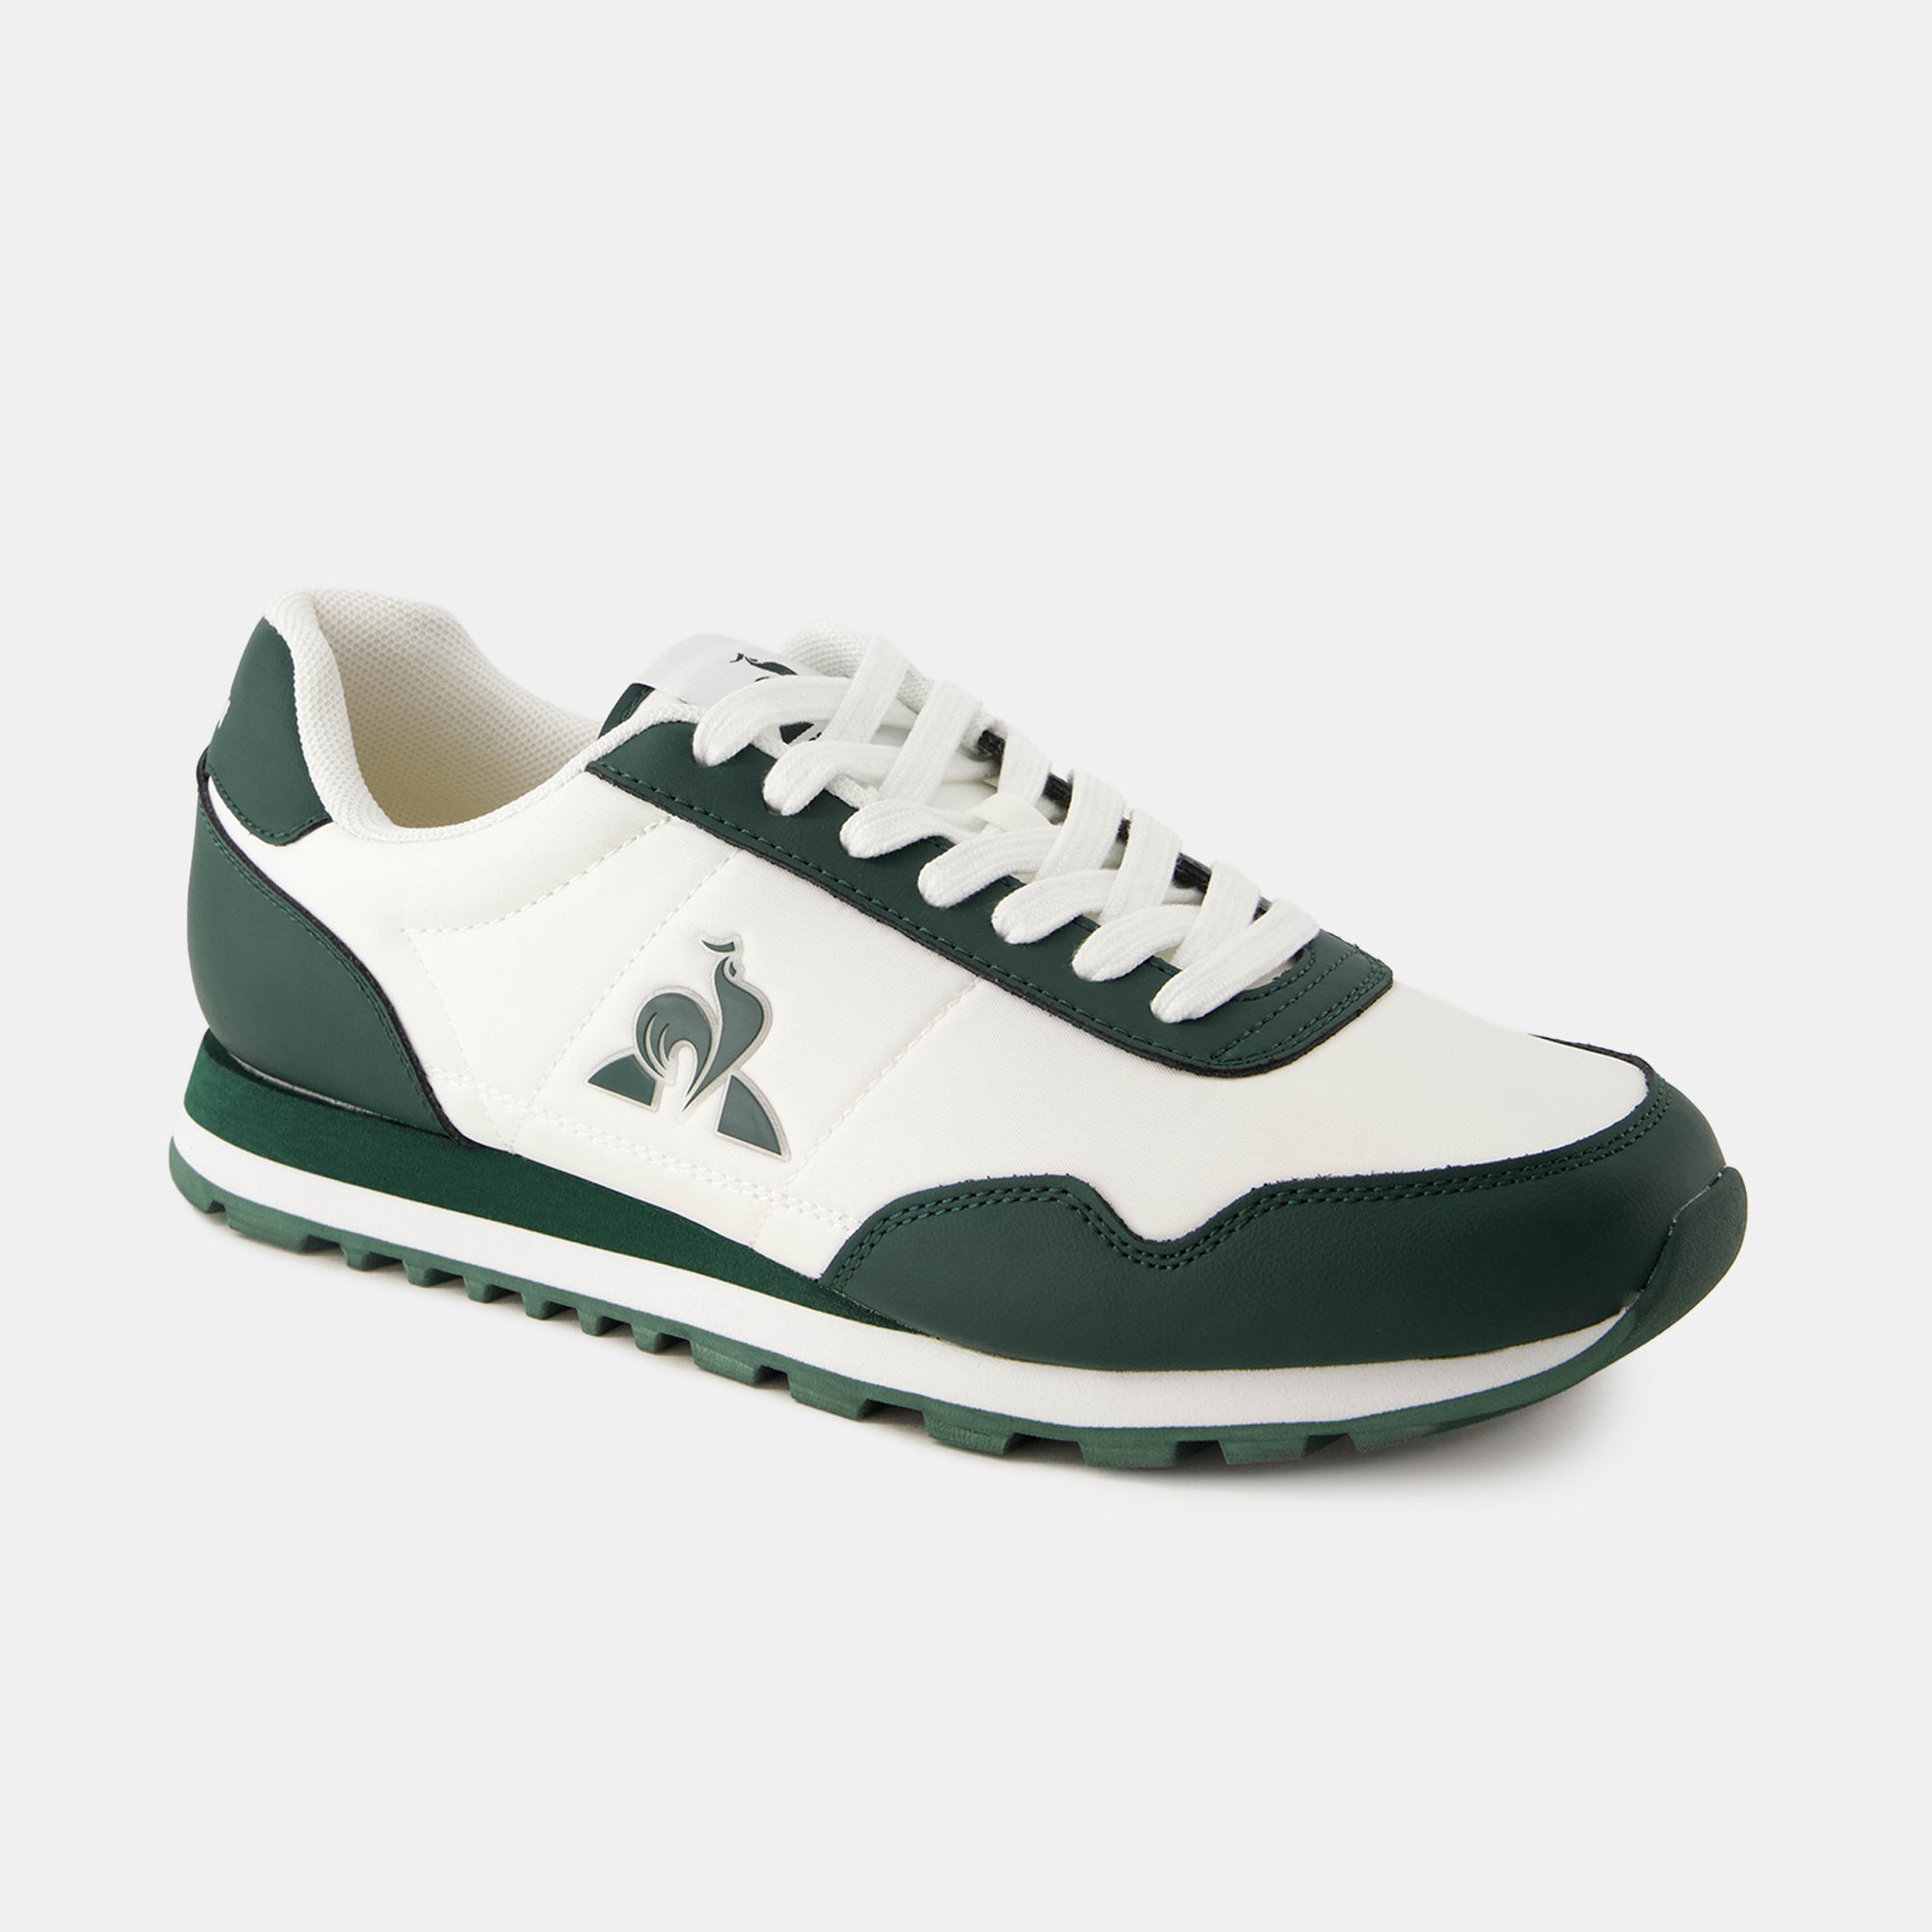 2423236-ASTRA_2 optical white/pine grove | Chaussures ASTRA_2 Unisexe